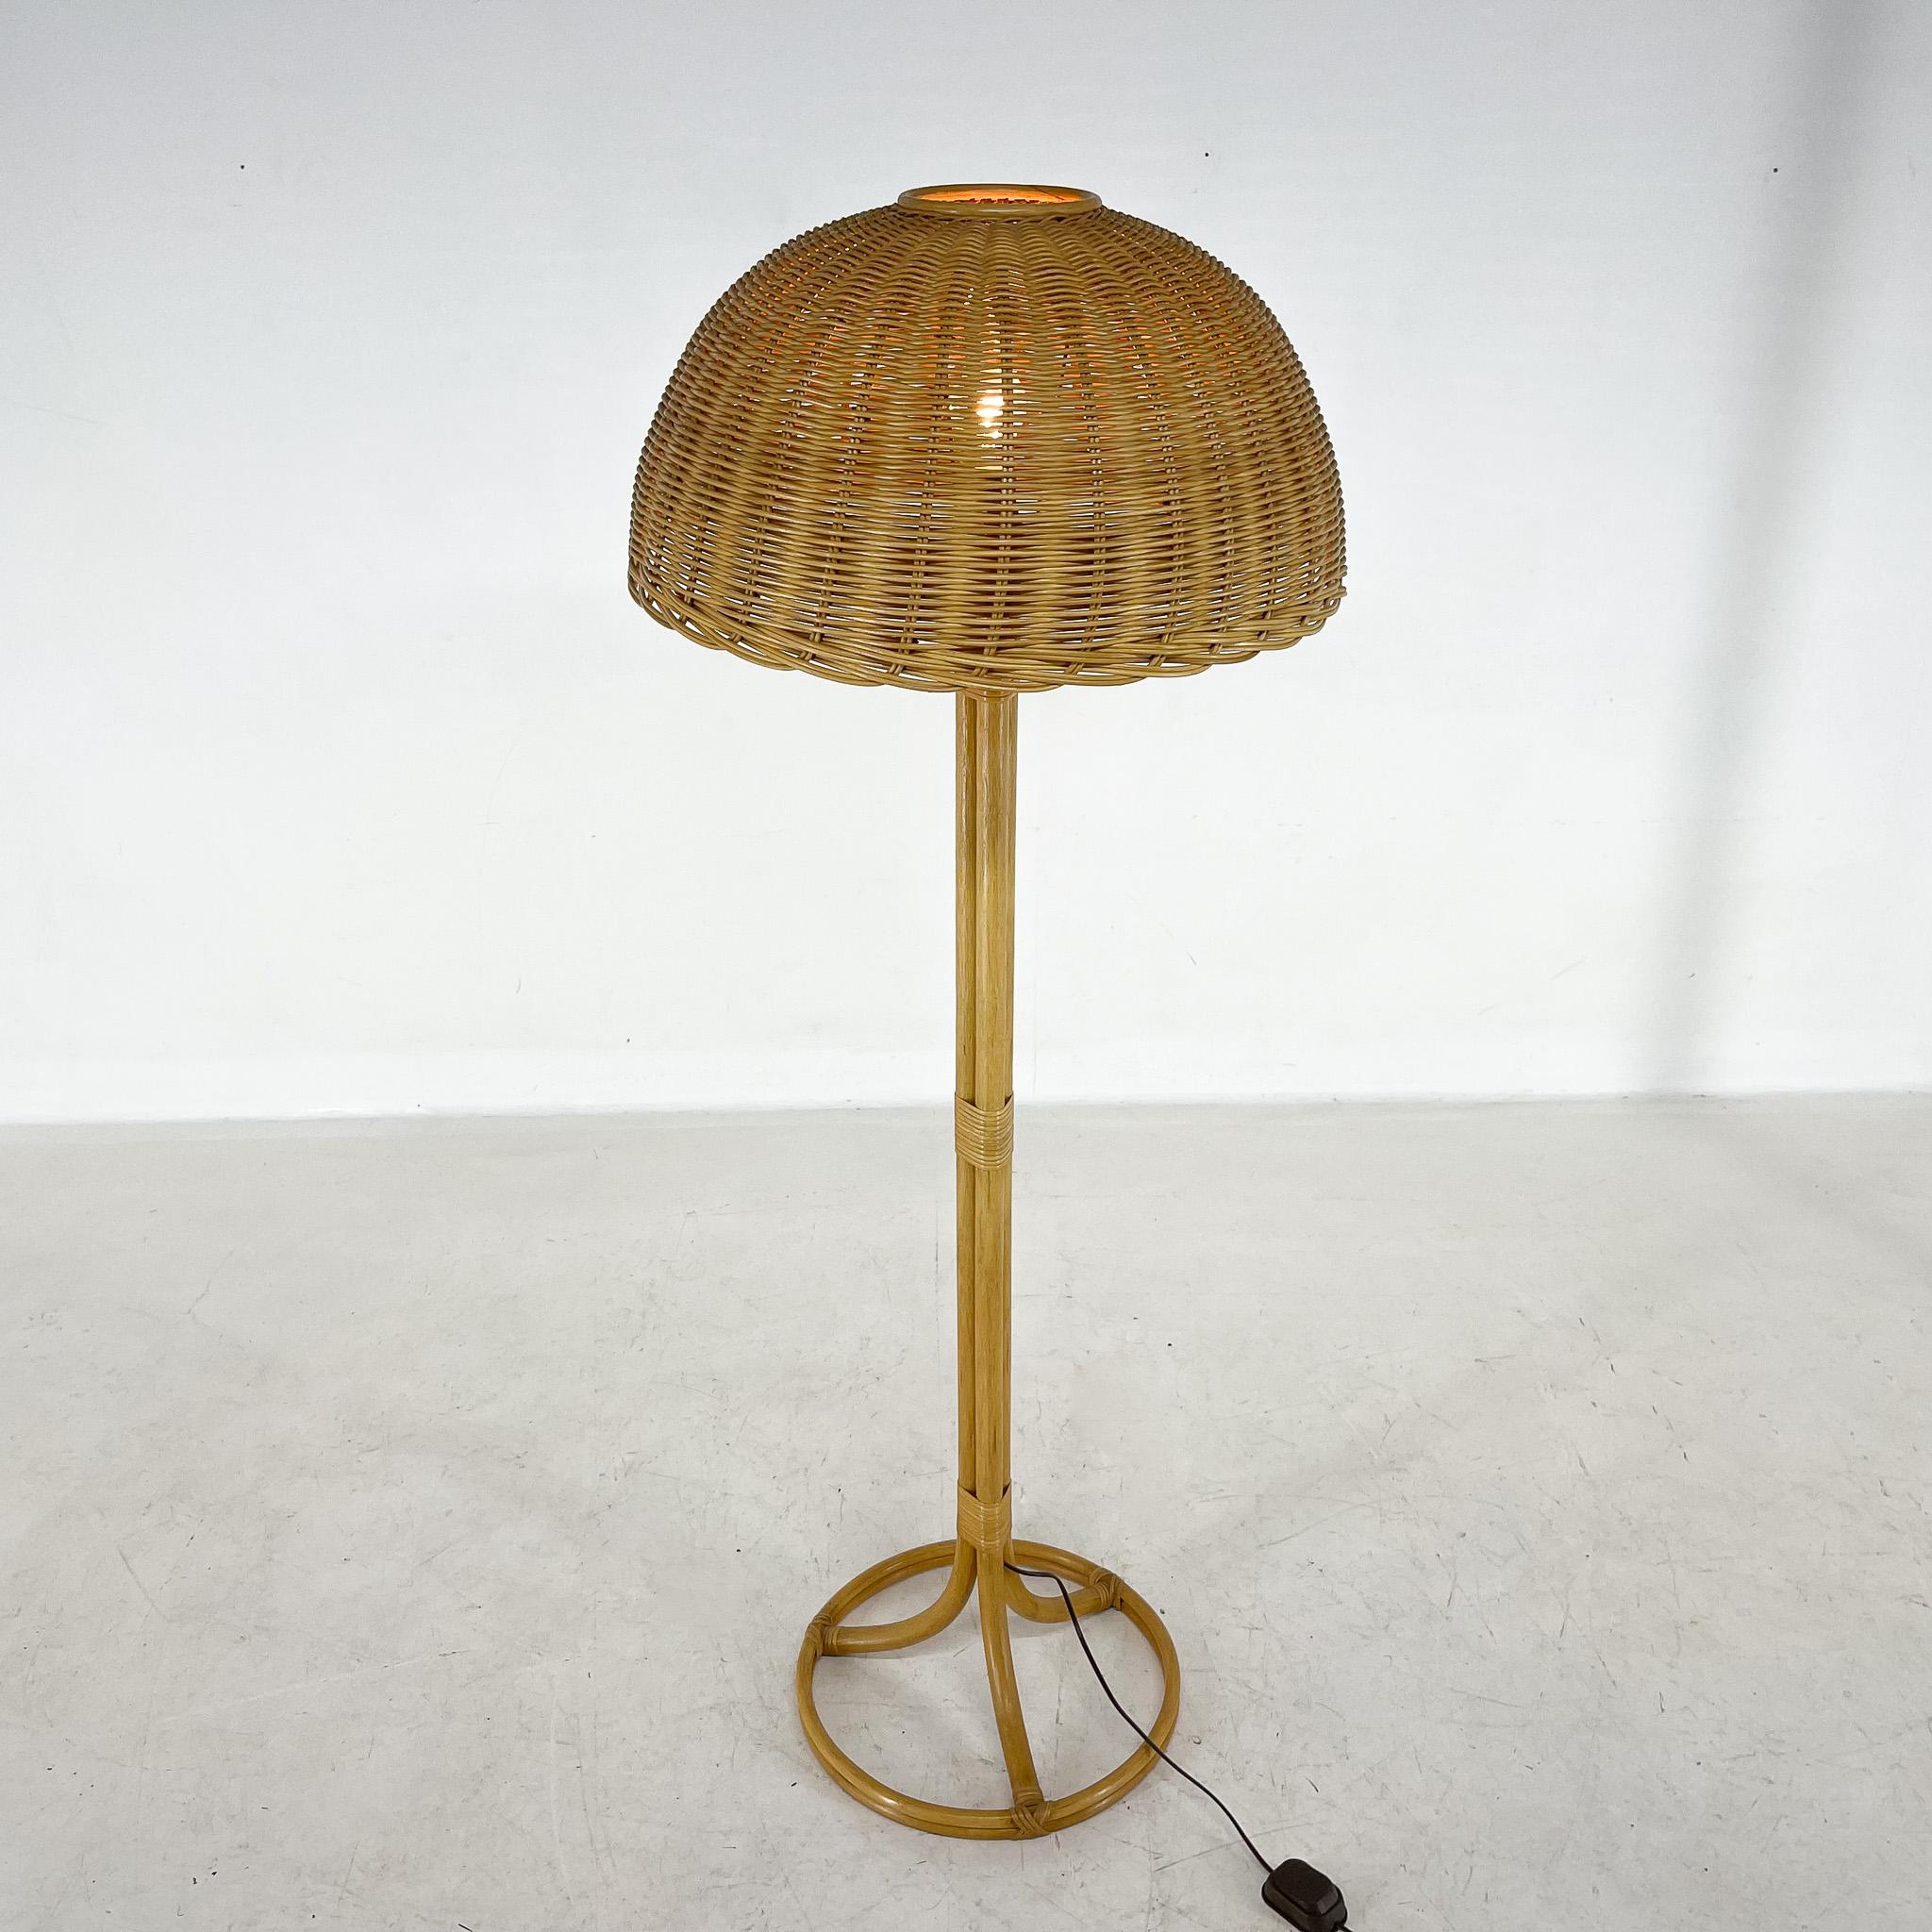 Vintage all-rattan floor lamp withe step-on switch, made in the former Czechoslovakia in the 1980's. All imperfections can be seen in the photos.